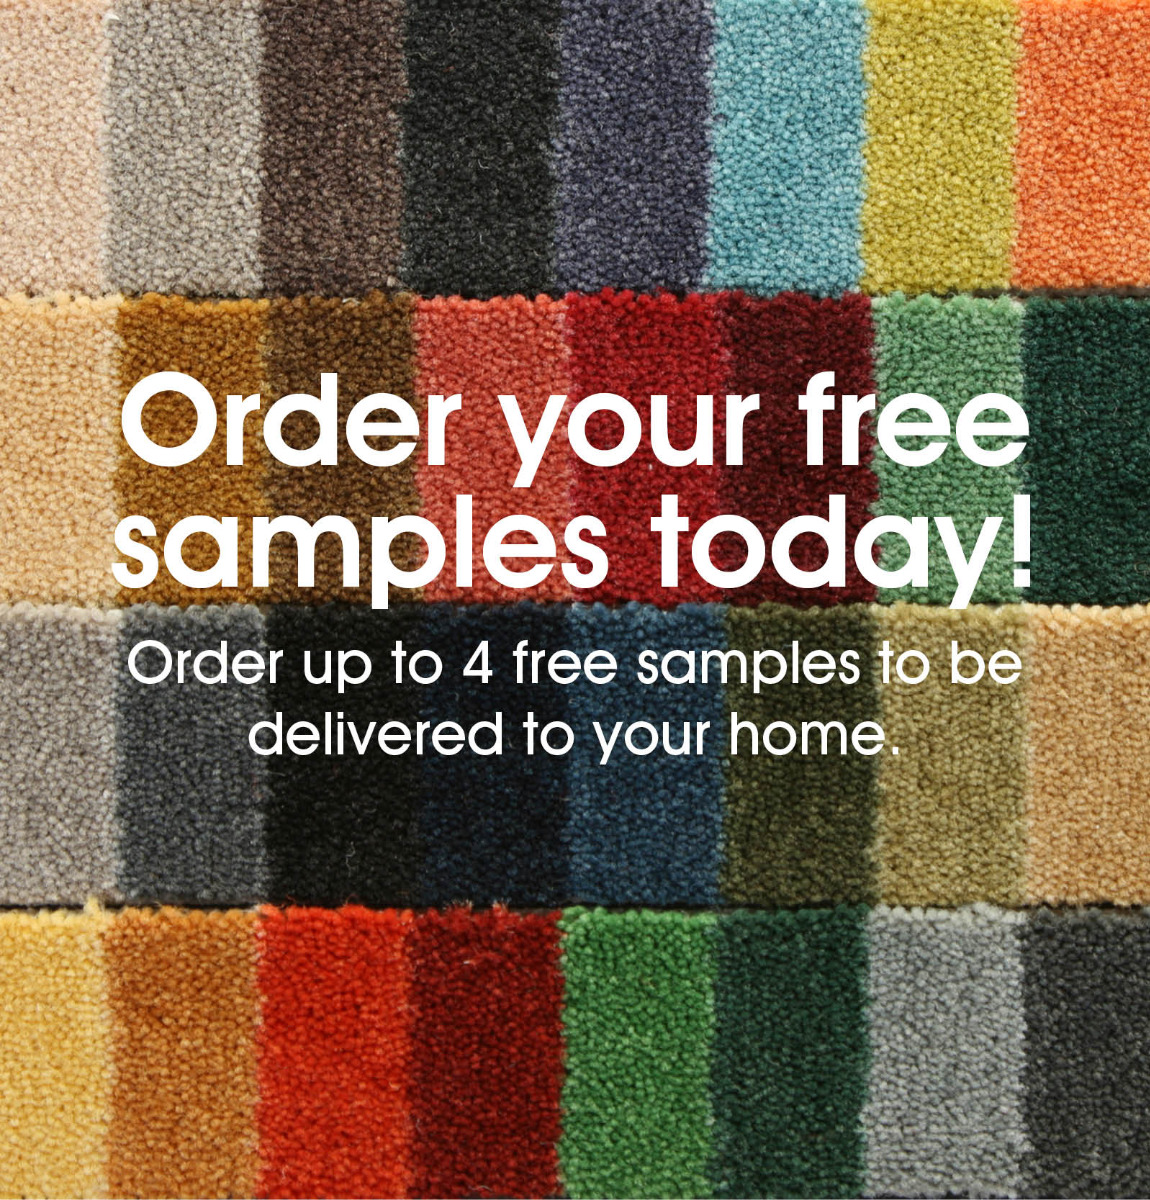 United Carpets and Beds - Order your free samples today !